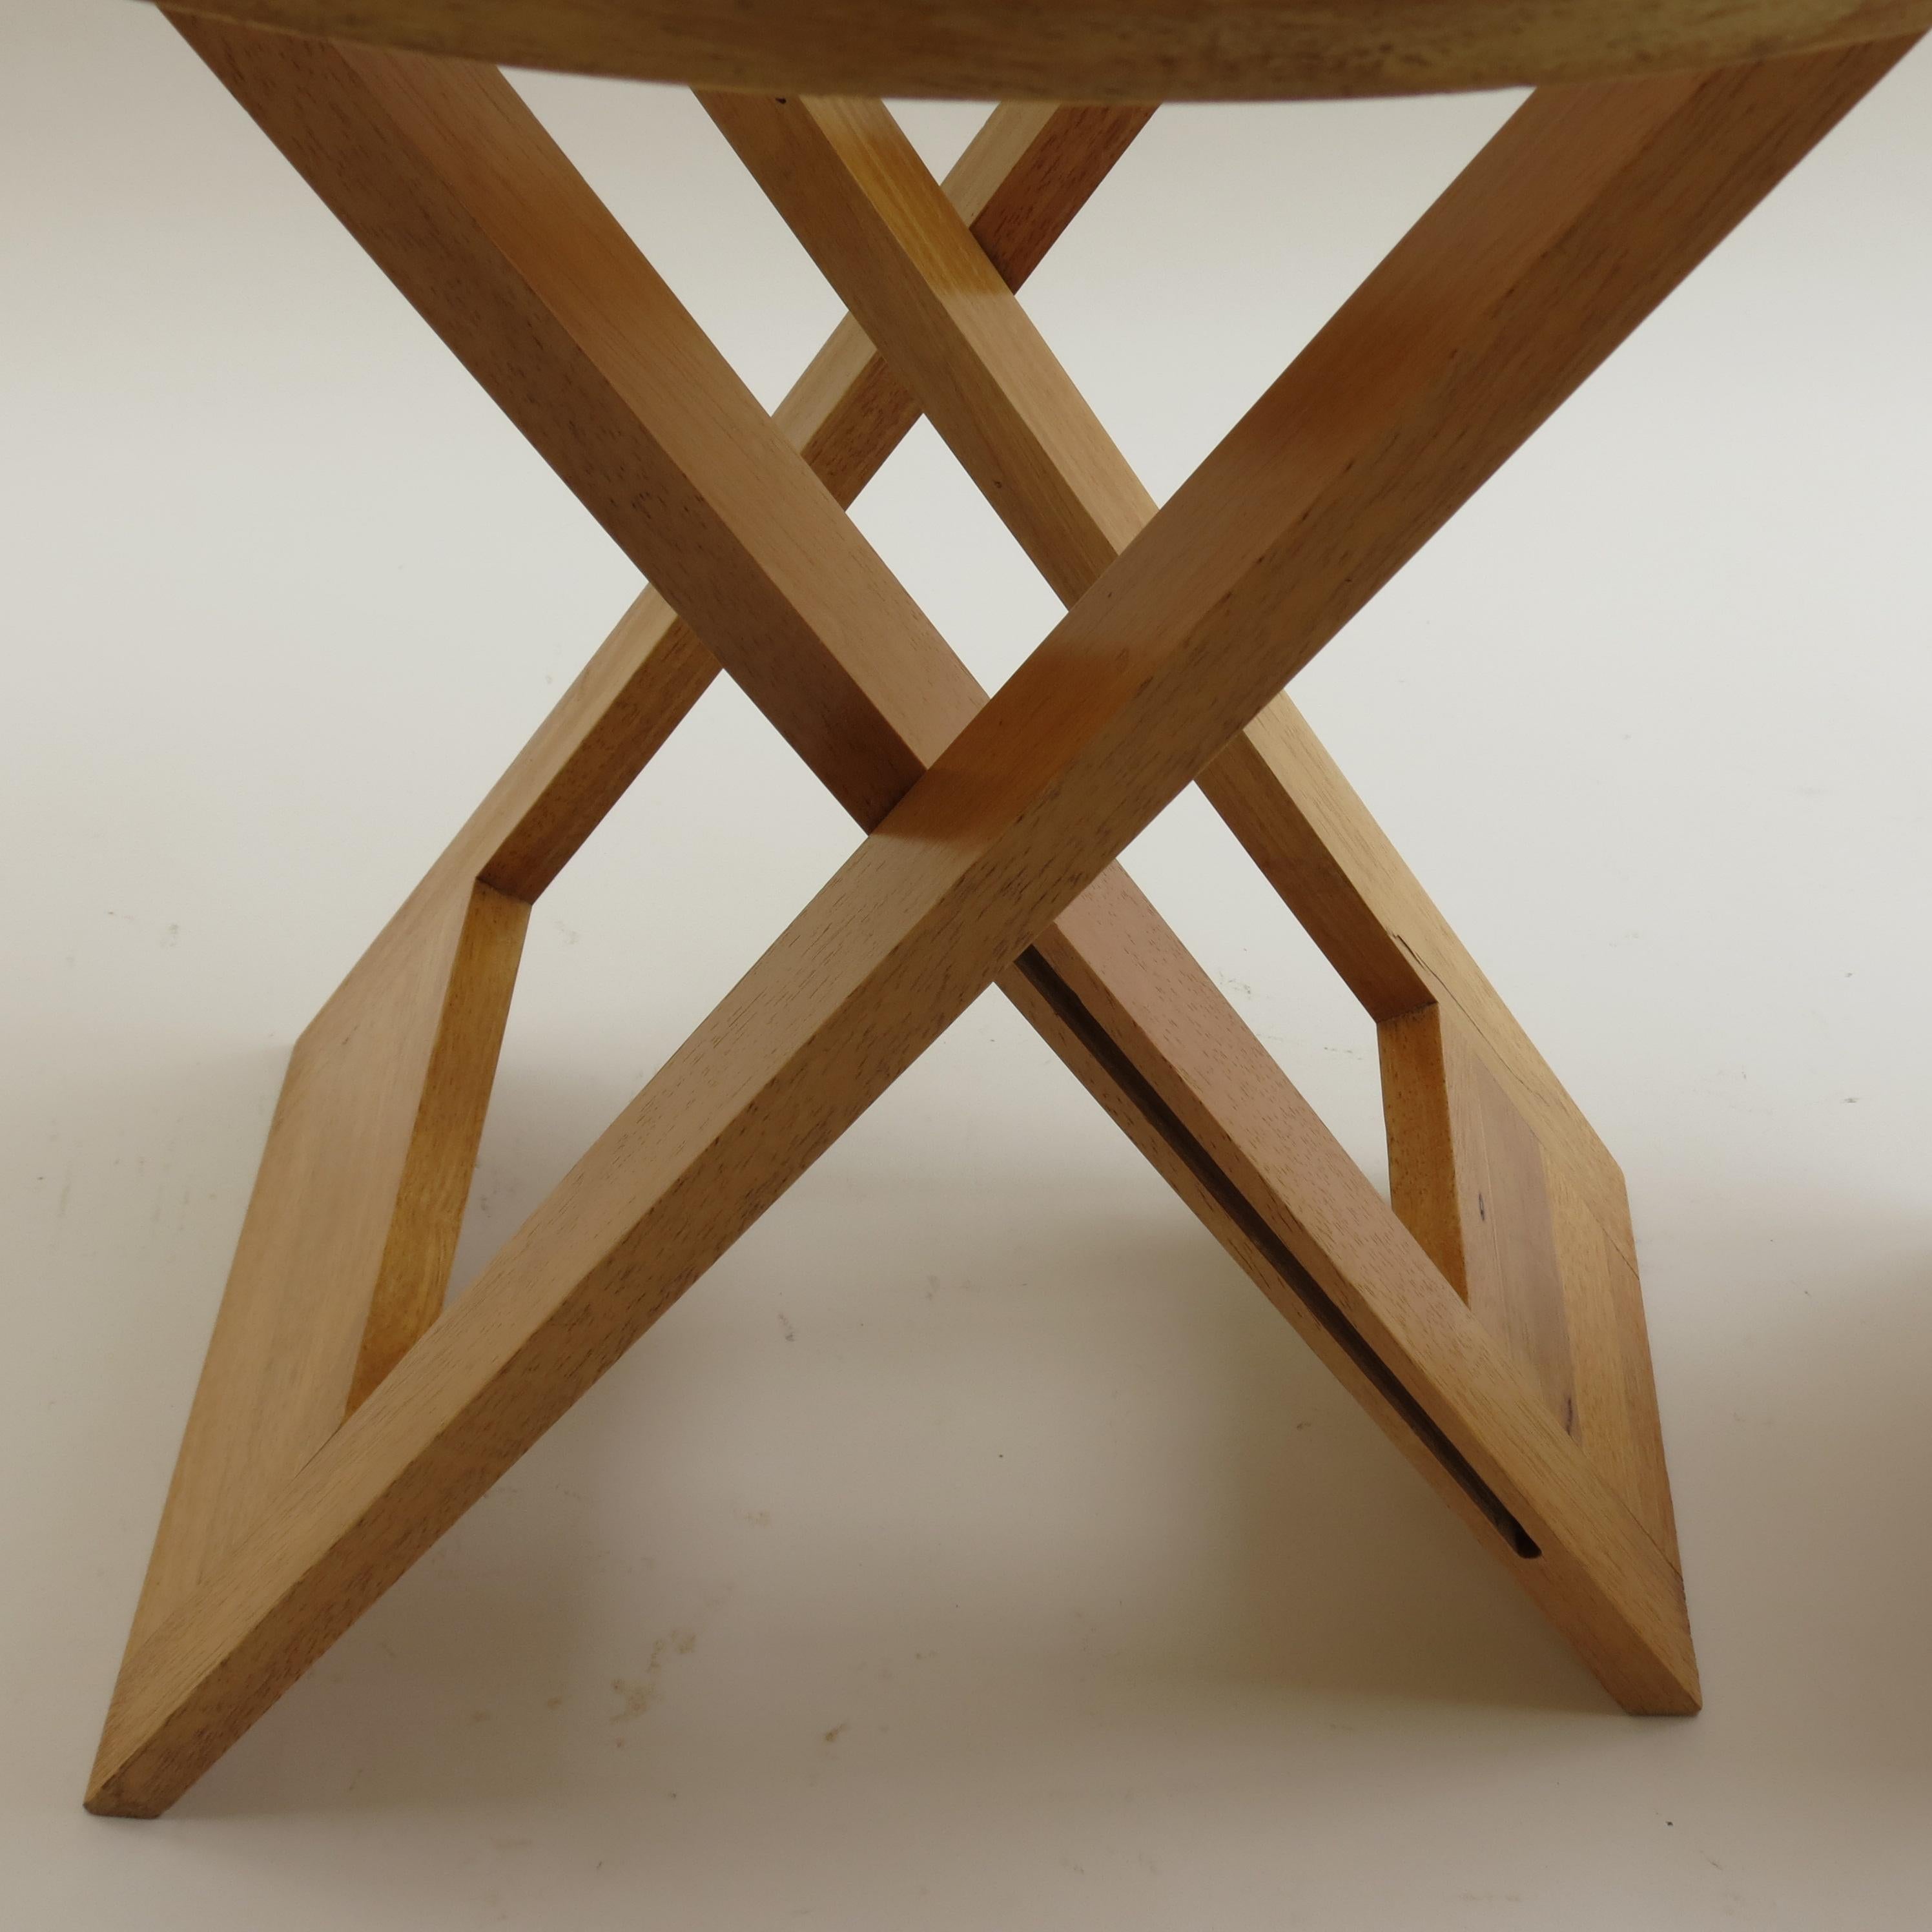 20th Century Vintage Folding Wooden Stool and Table in the Style of Suzy Stool by Adrian Reed